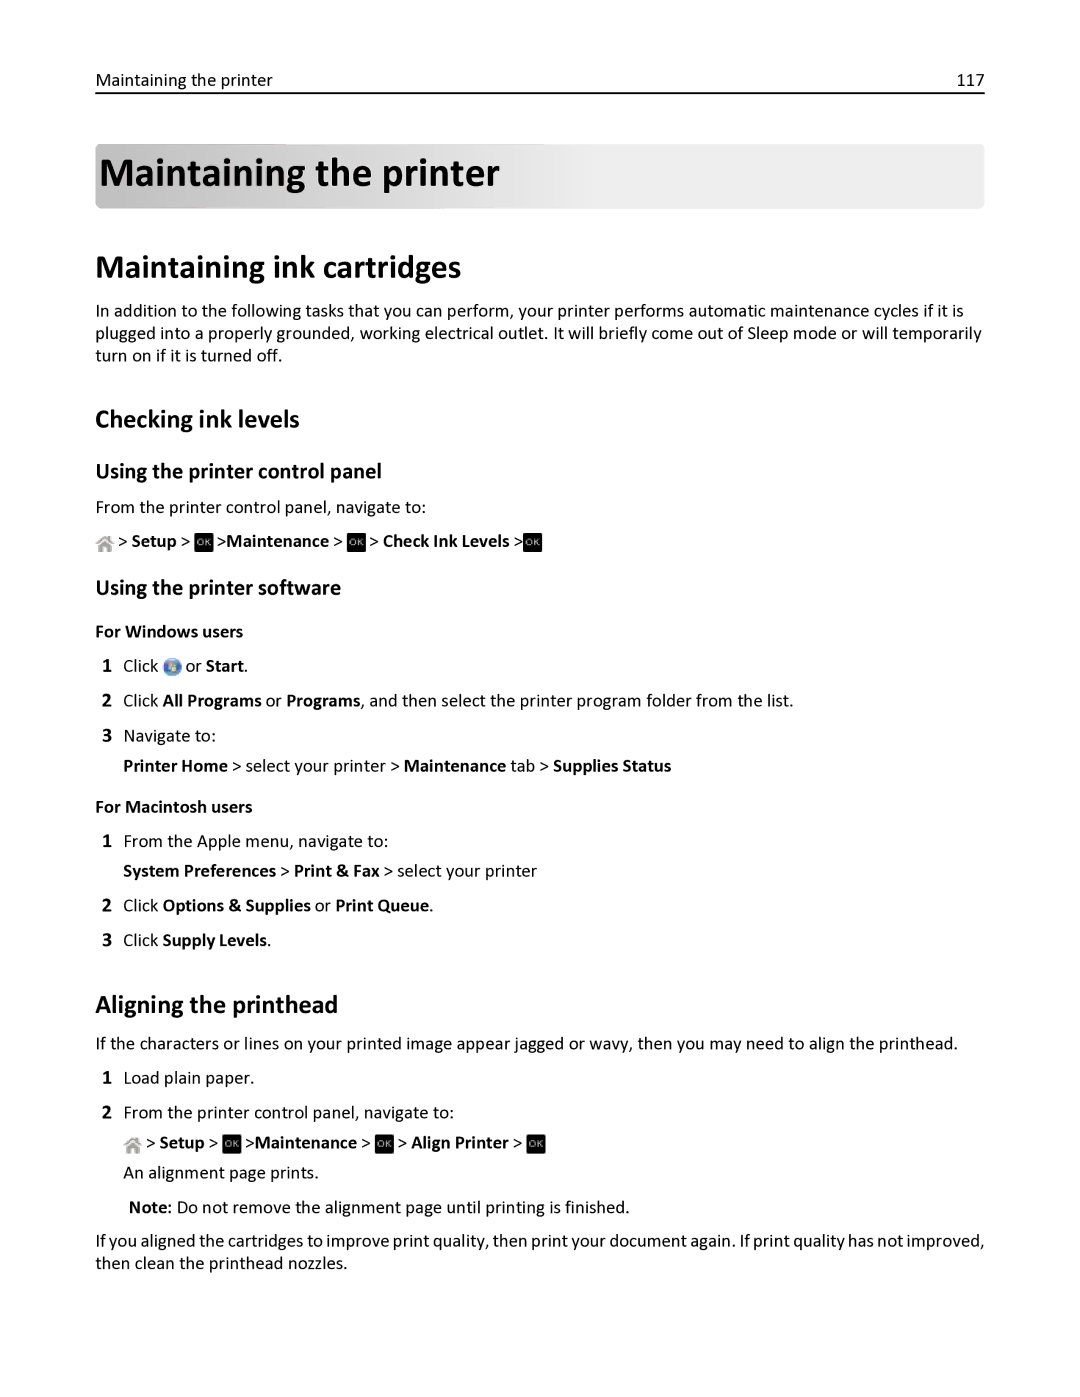 Dell V525W manual Maintaining the printer, Maintaining ink cartridges, Checking ink levels, Aligning the printhead 